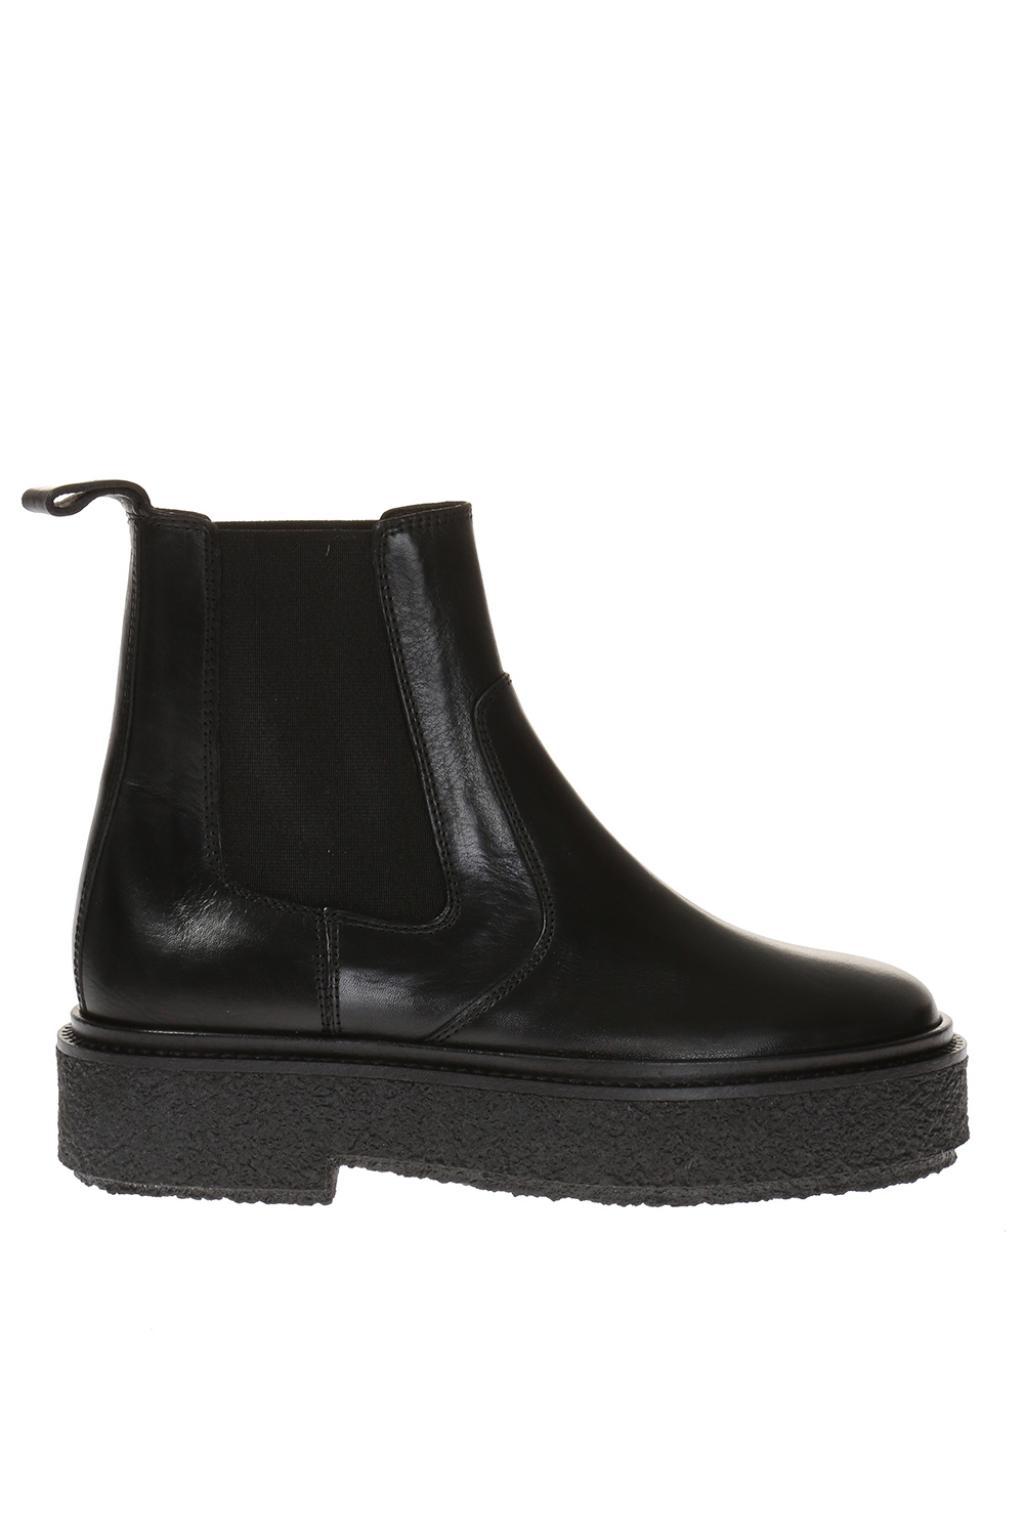 Isabel Marant Celtyne Leather Chelsea Boots in Black - Lyst